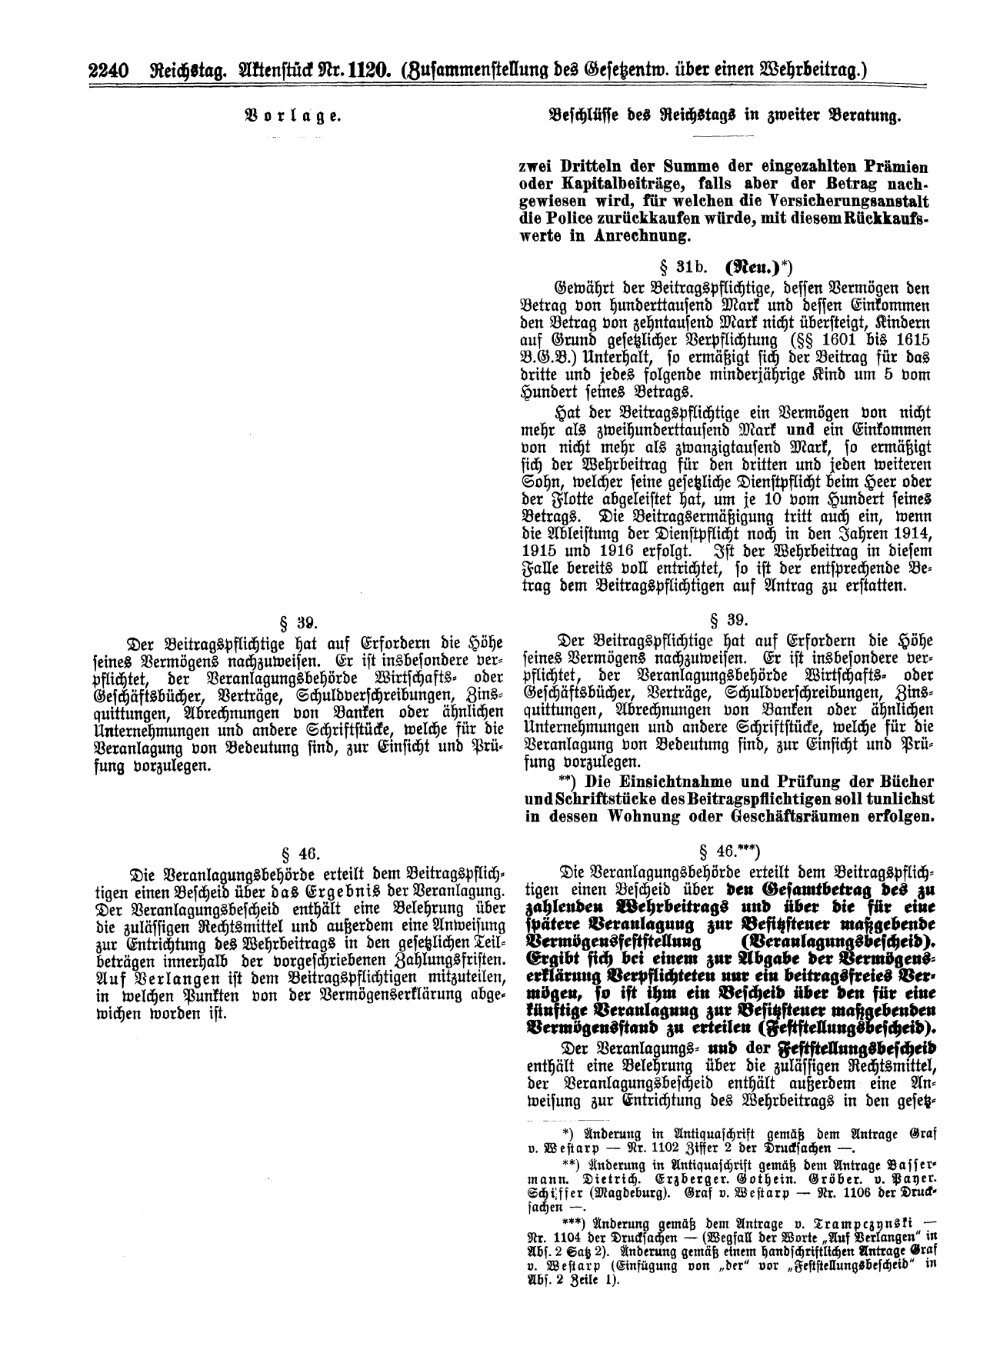 Scan of page 2240